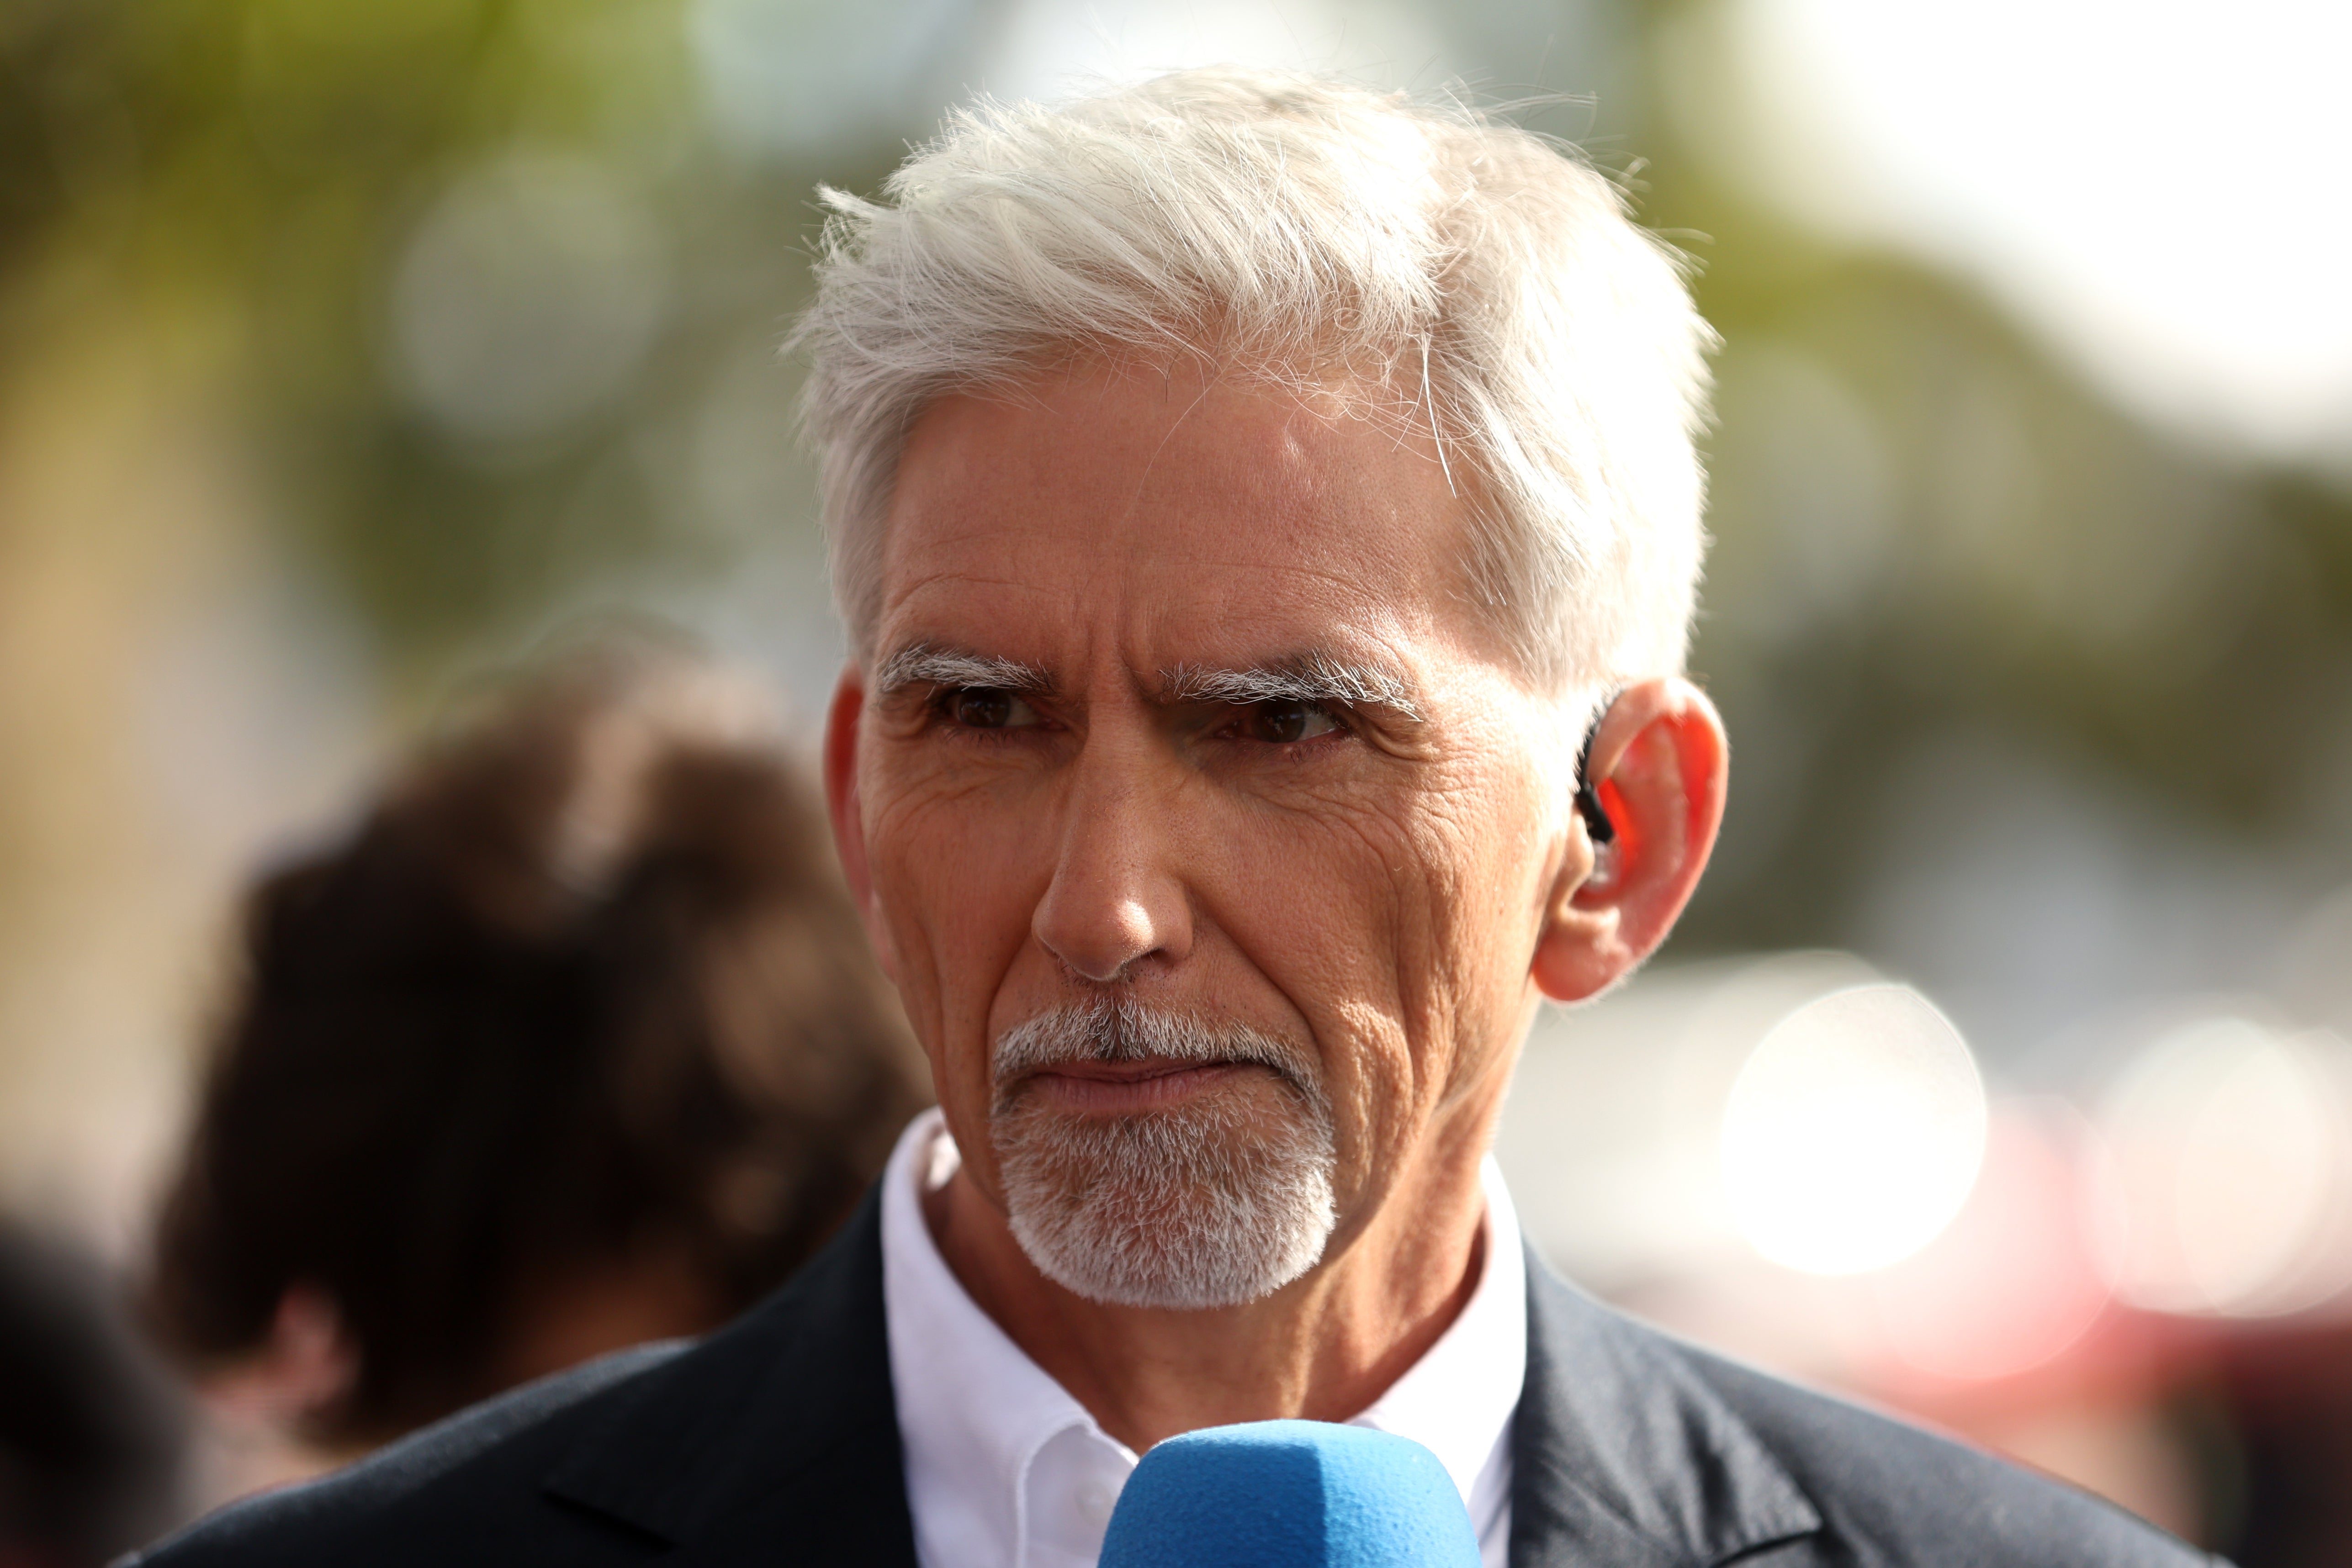 1996 F1 world champion Damon Hill says it’s very possible Red Bull could win every race this season